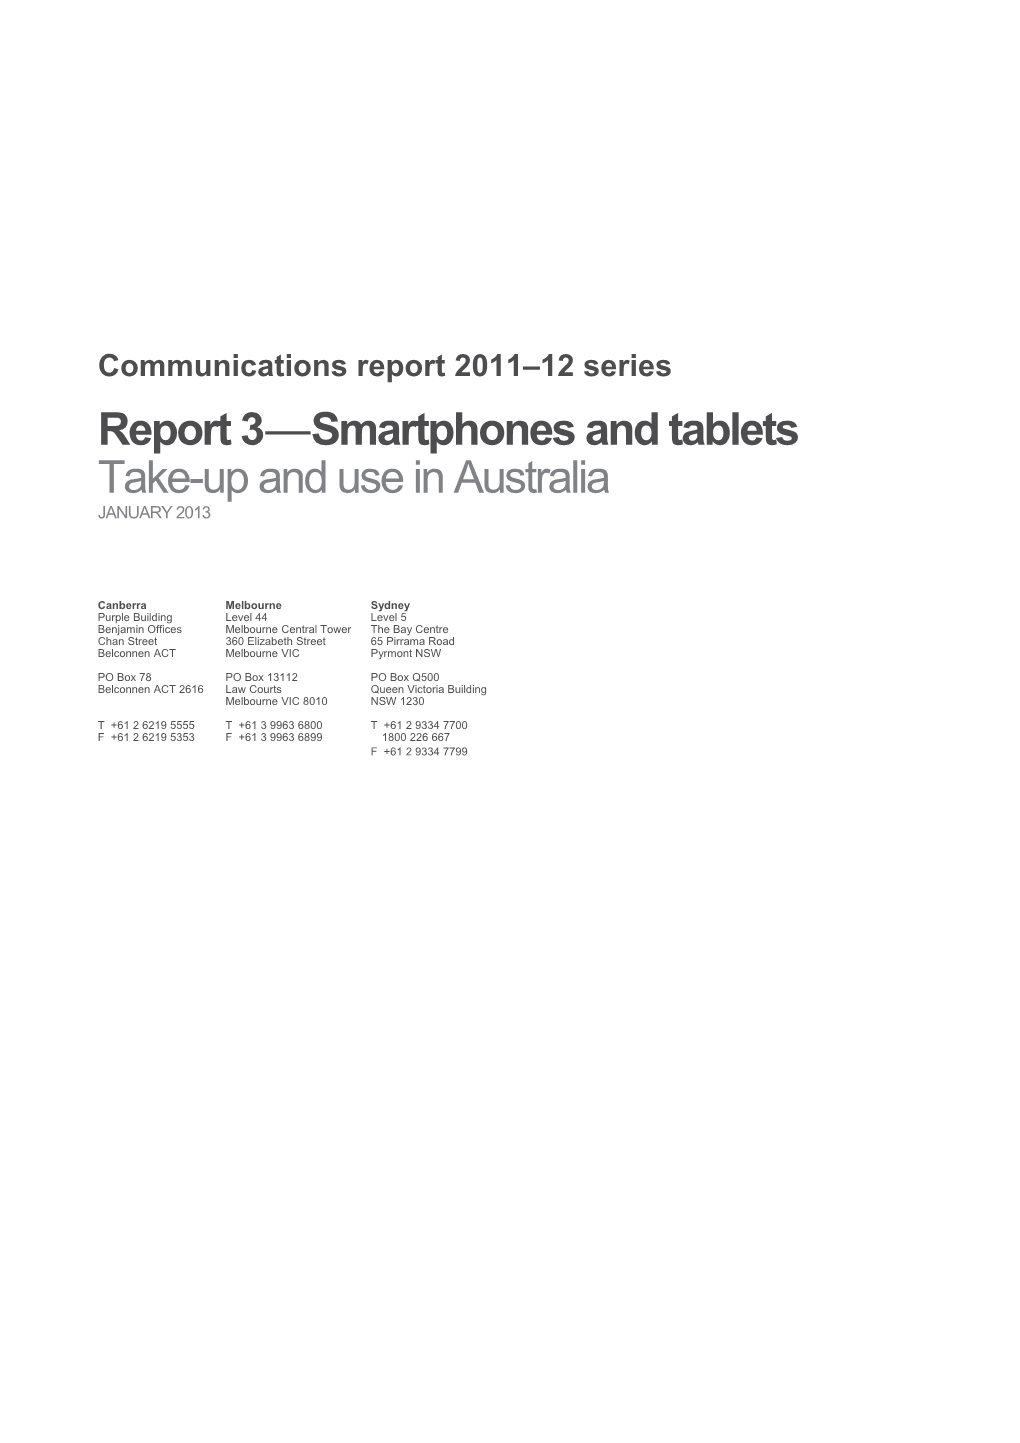 Report 3 Smartphones and Tablets (Comms Report 2011-12 Series)